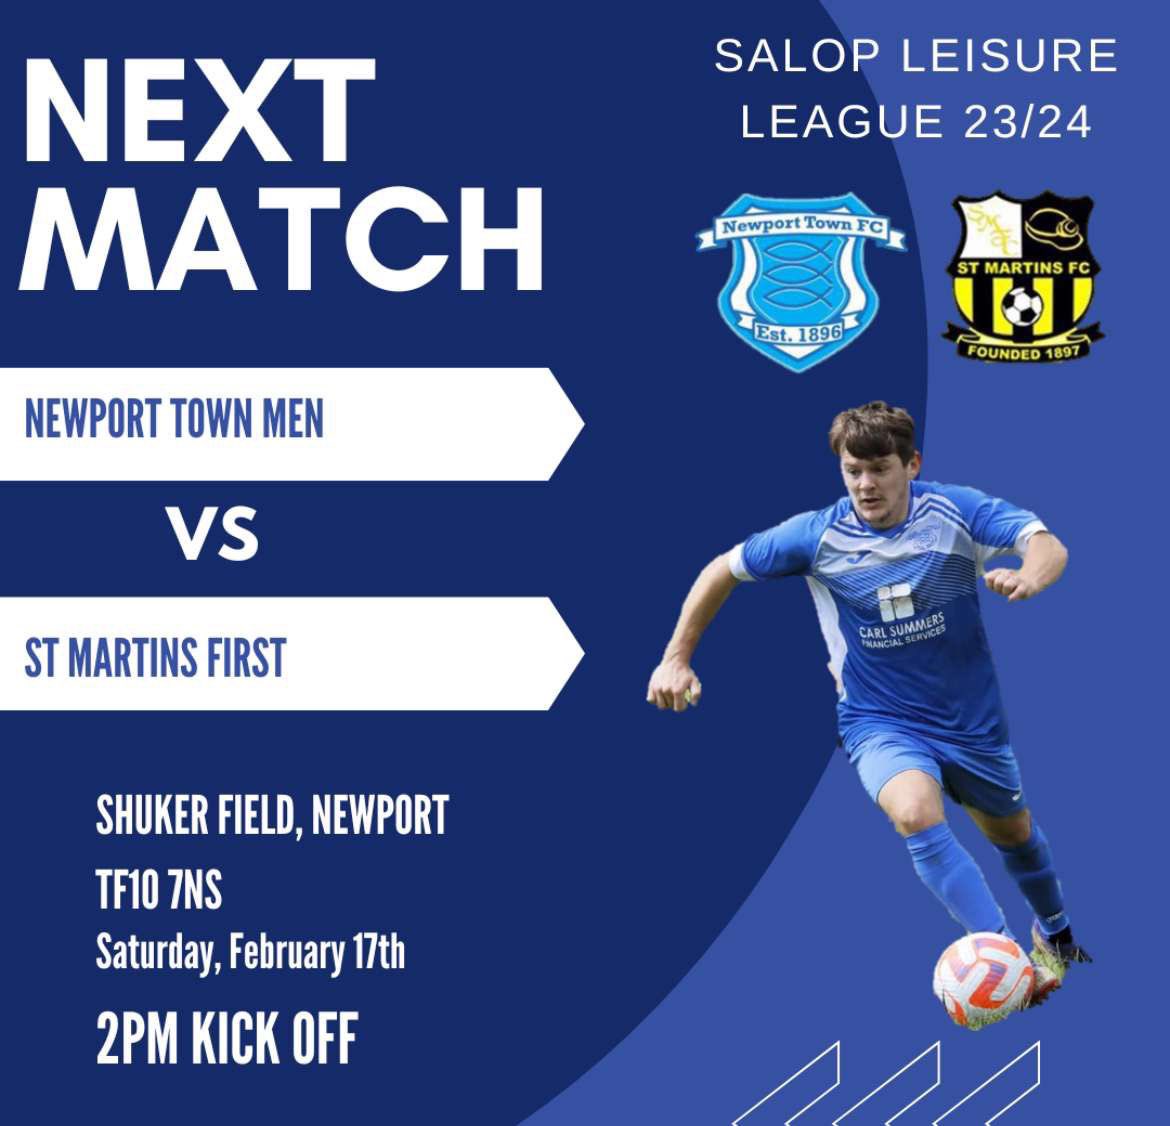 On Saturday we take on @St_MartinsFC at the Fortress Shuker🐟 Newport go into the game after back to back wins, hoping to continue our good form🐟💙 Come down and support the lads! 🫡 #threefishes #upthetown